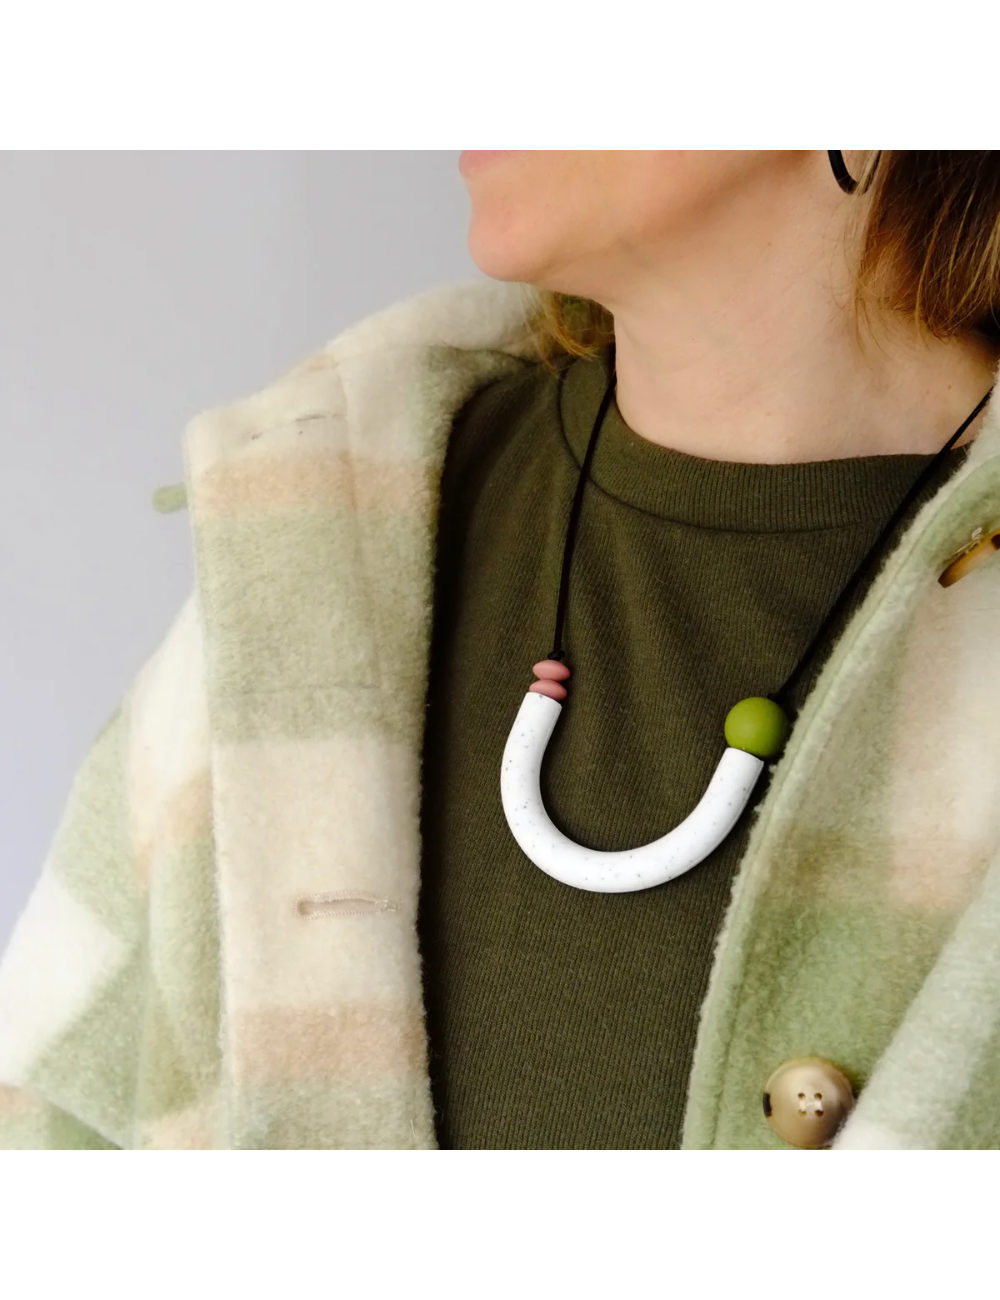 The Effie - Teething Necklace for Parents